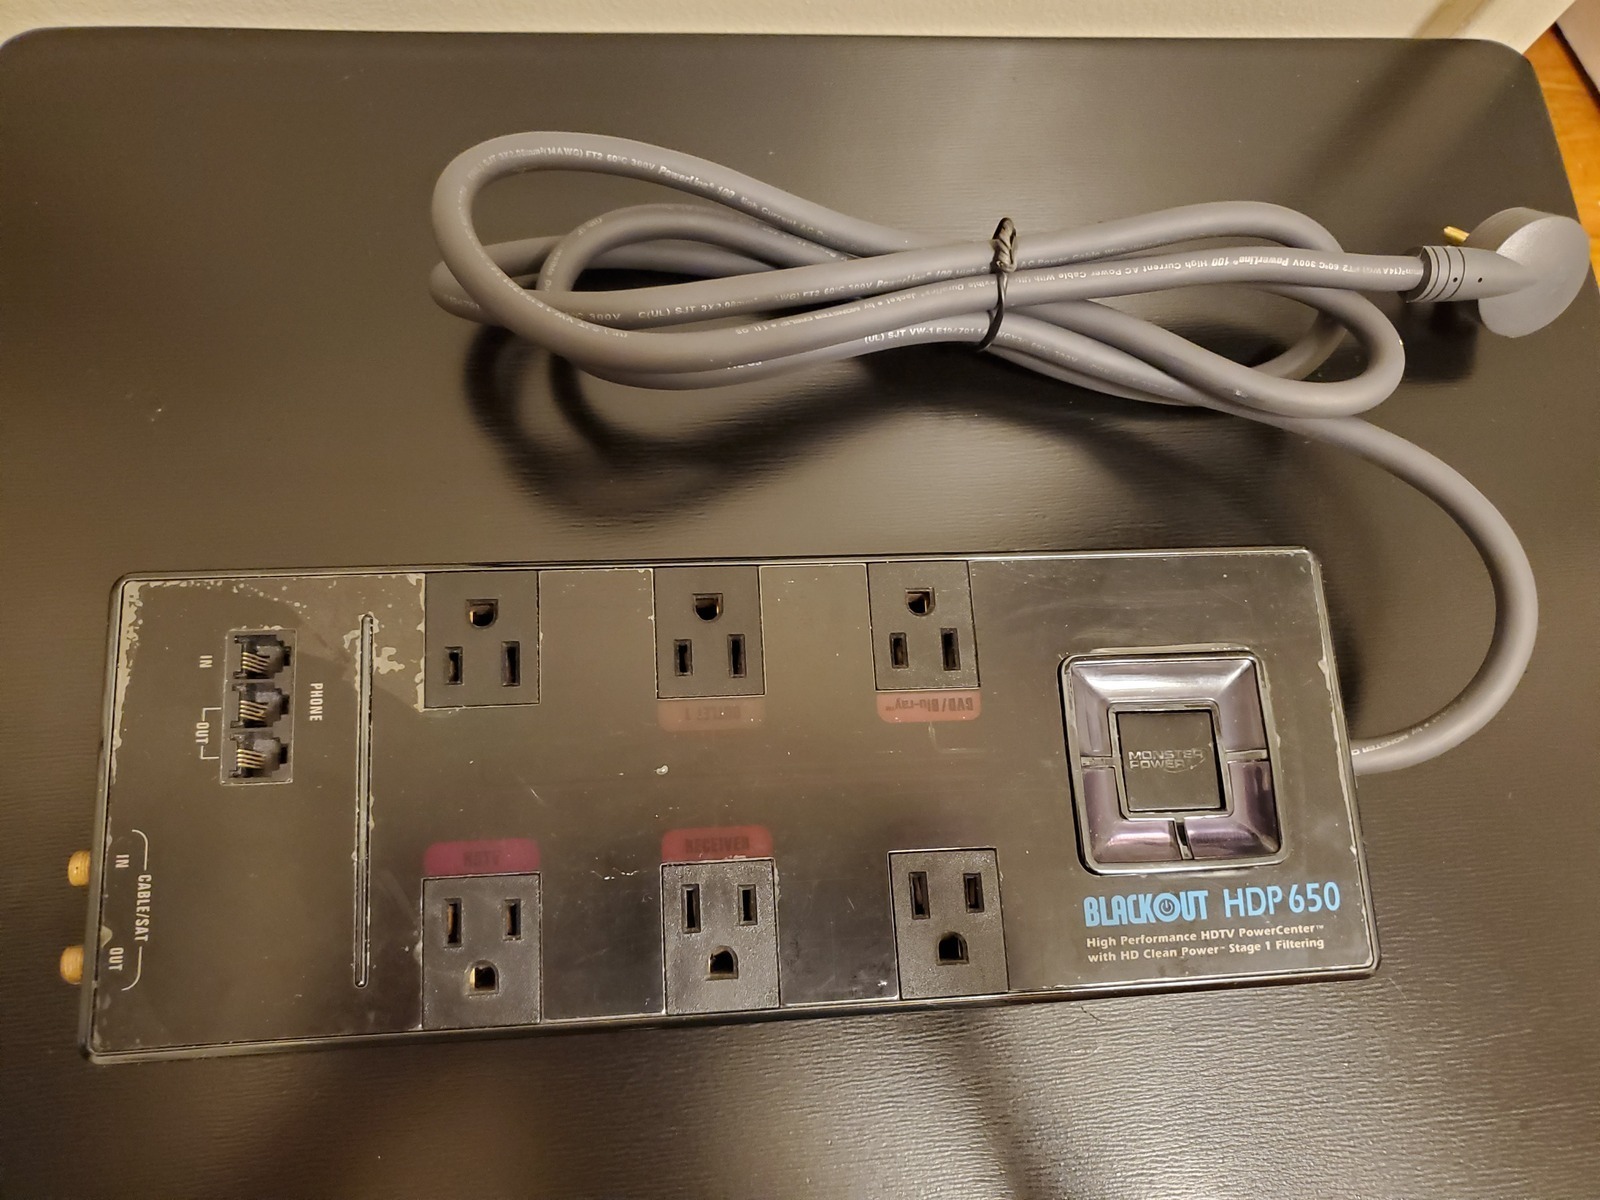 Monster Power MP HDP 650 Advanced Surge Protector - 8 Outlets - 3240 Joules - $40.00